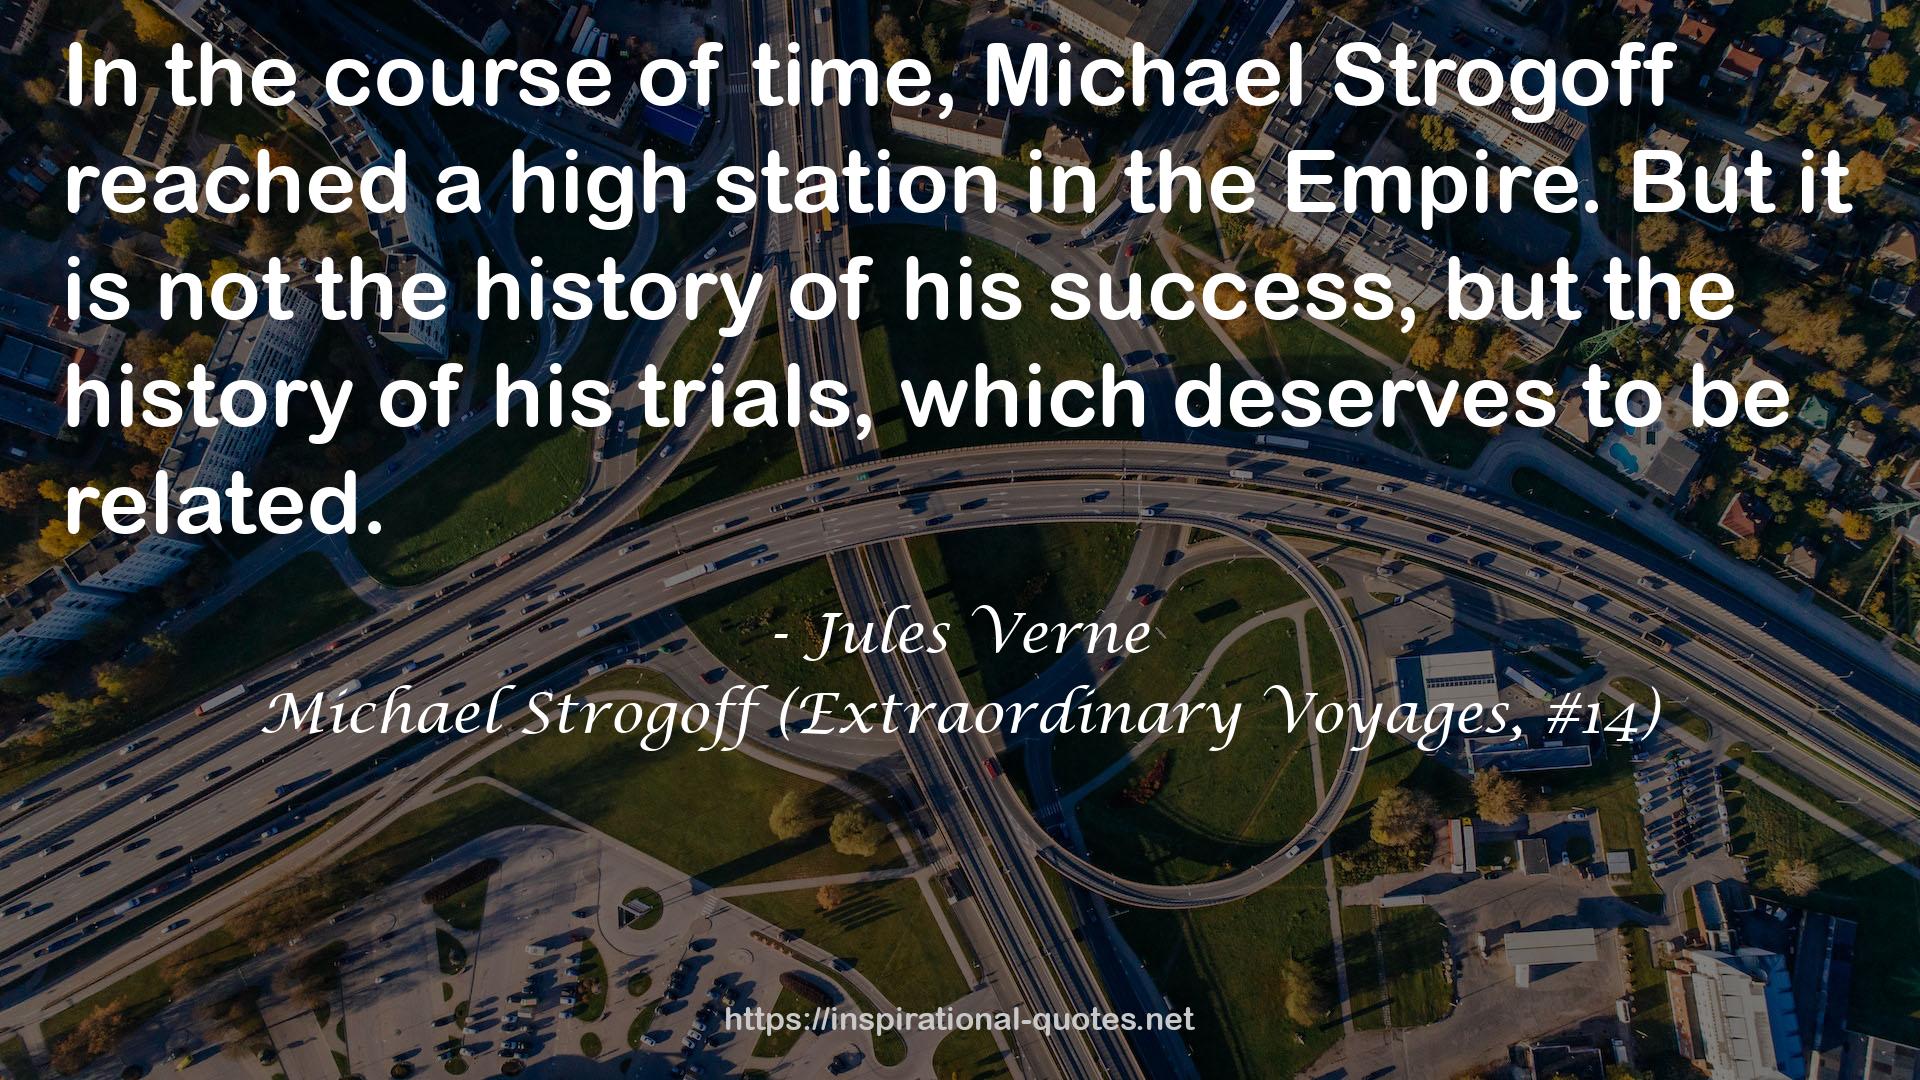 Michael Strogoff (Extraordinary Voyages, #14) QUOTES